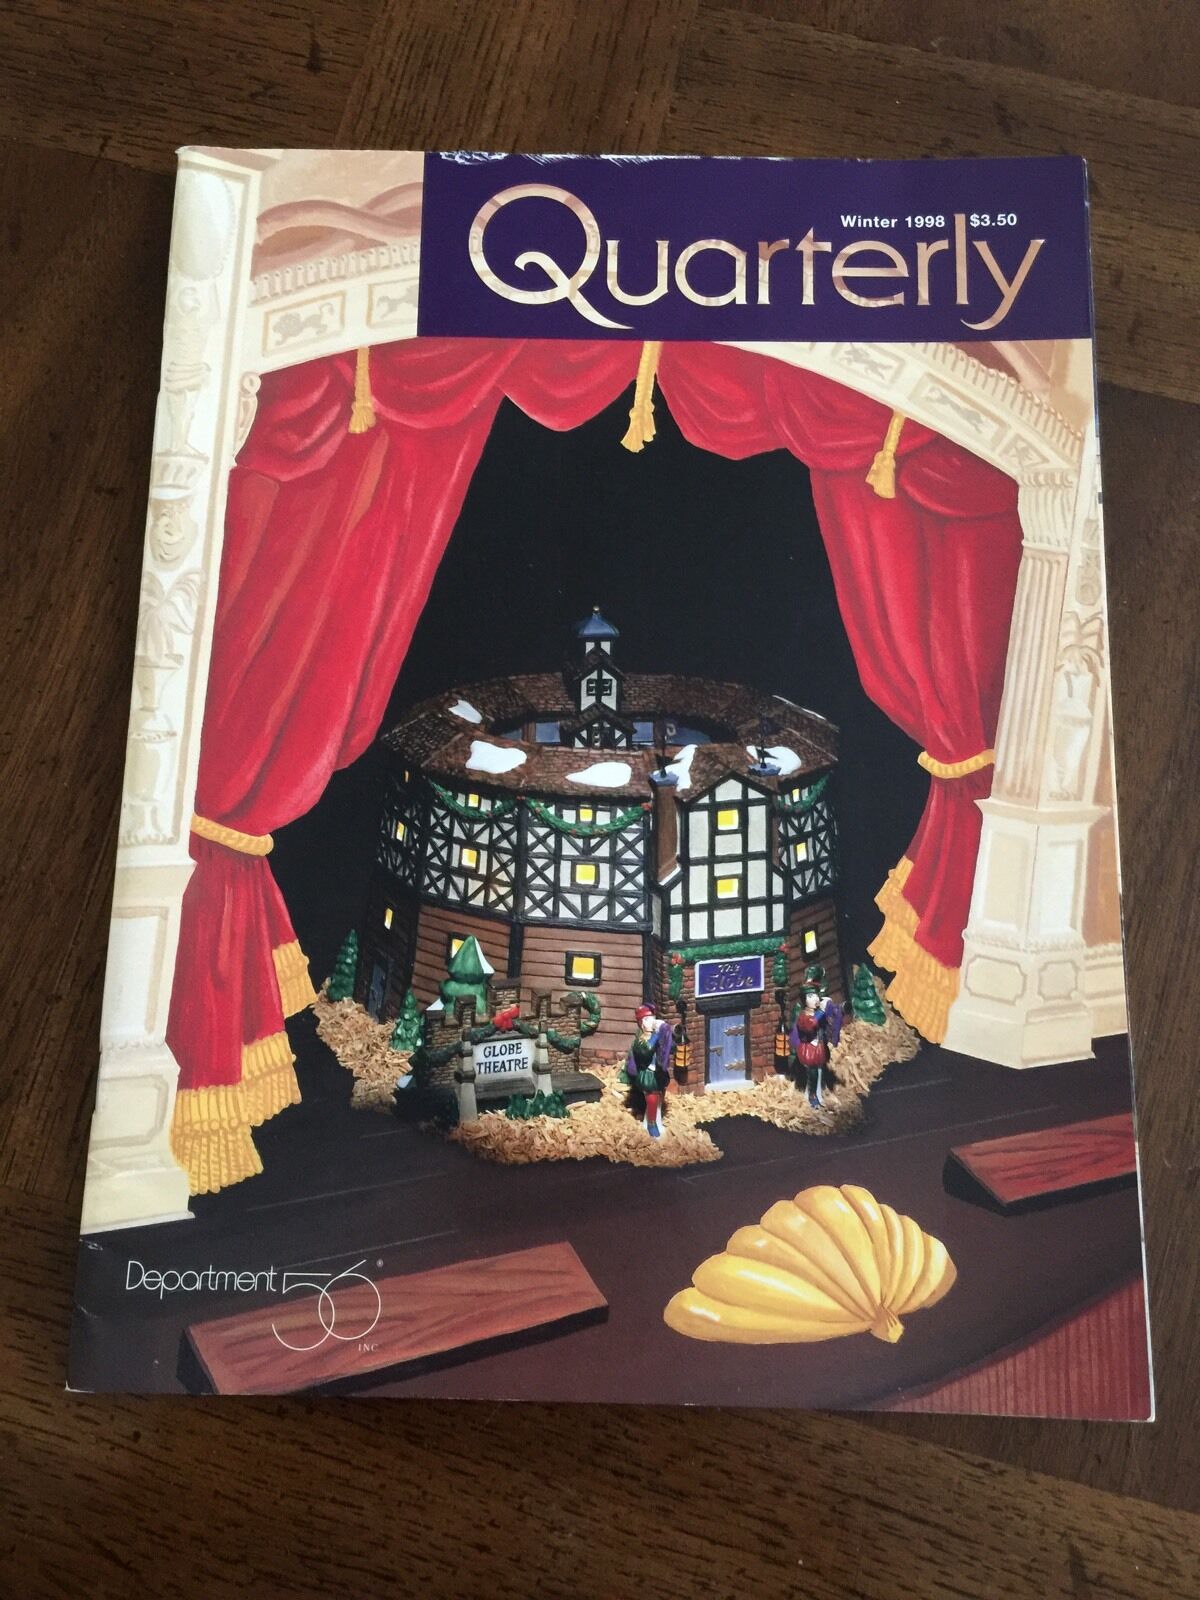 DEPT 56 WINTER 1998 ~QUARTERLY MAGAZINE Featuring PREVIEW EDITION